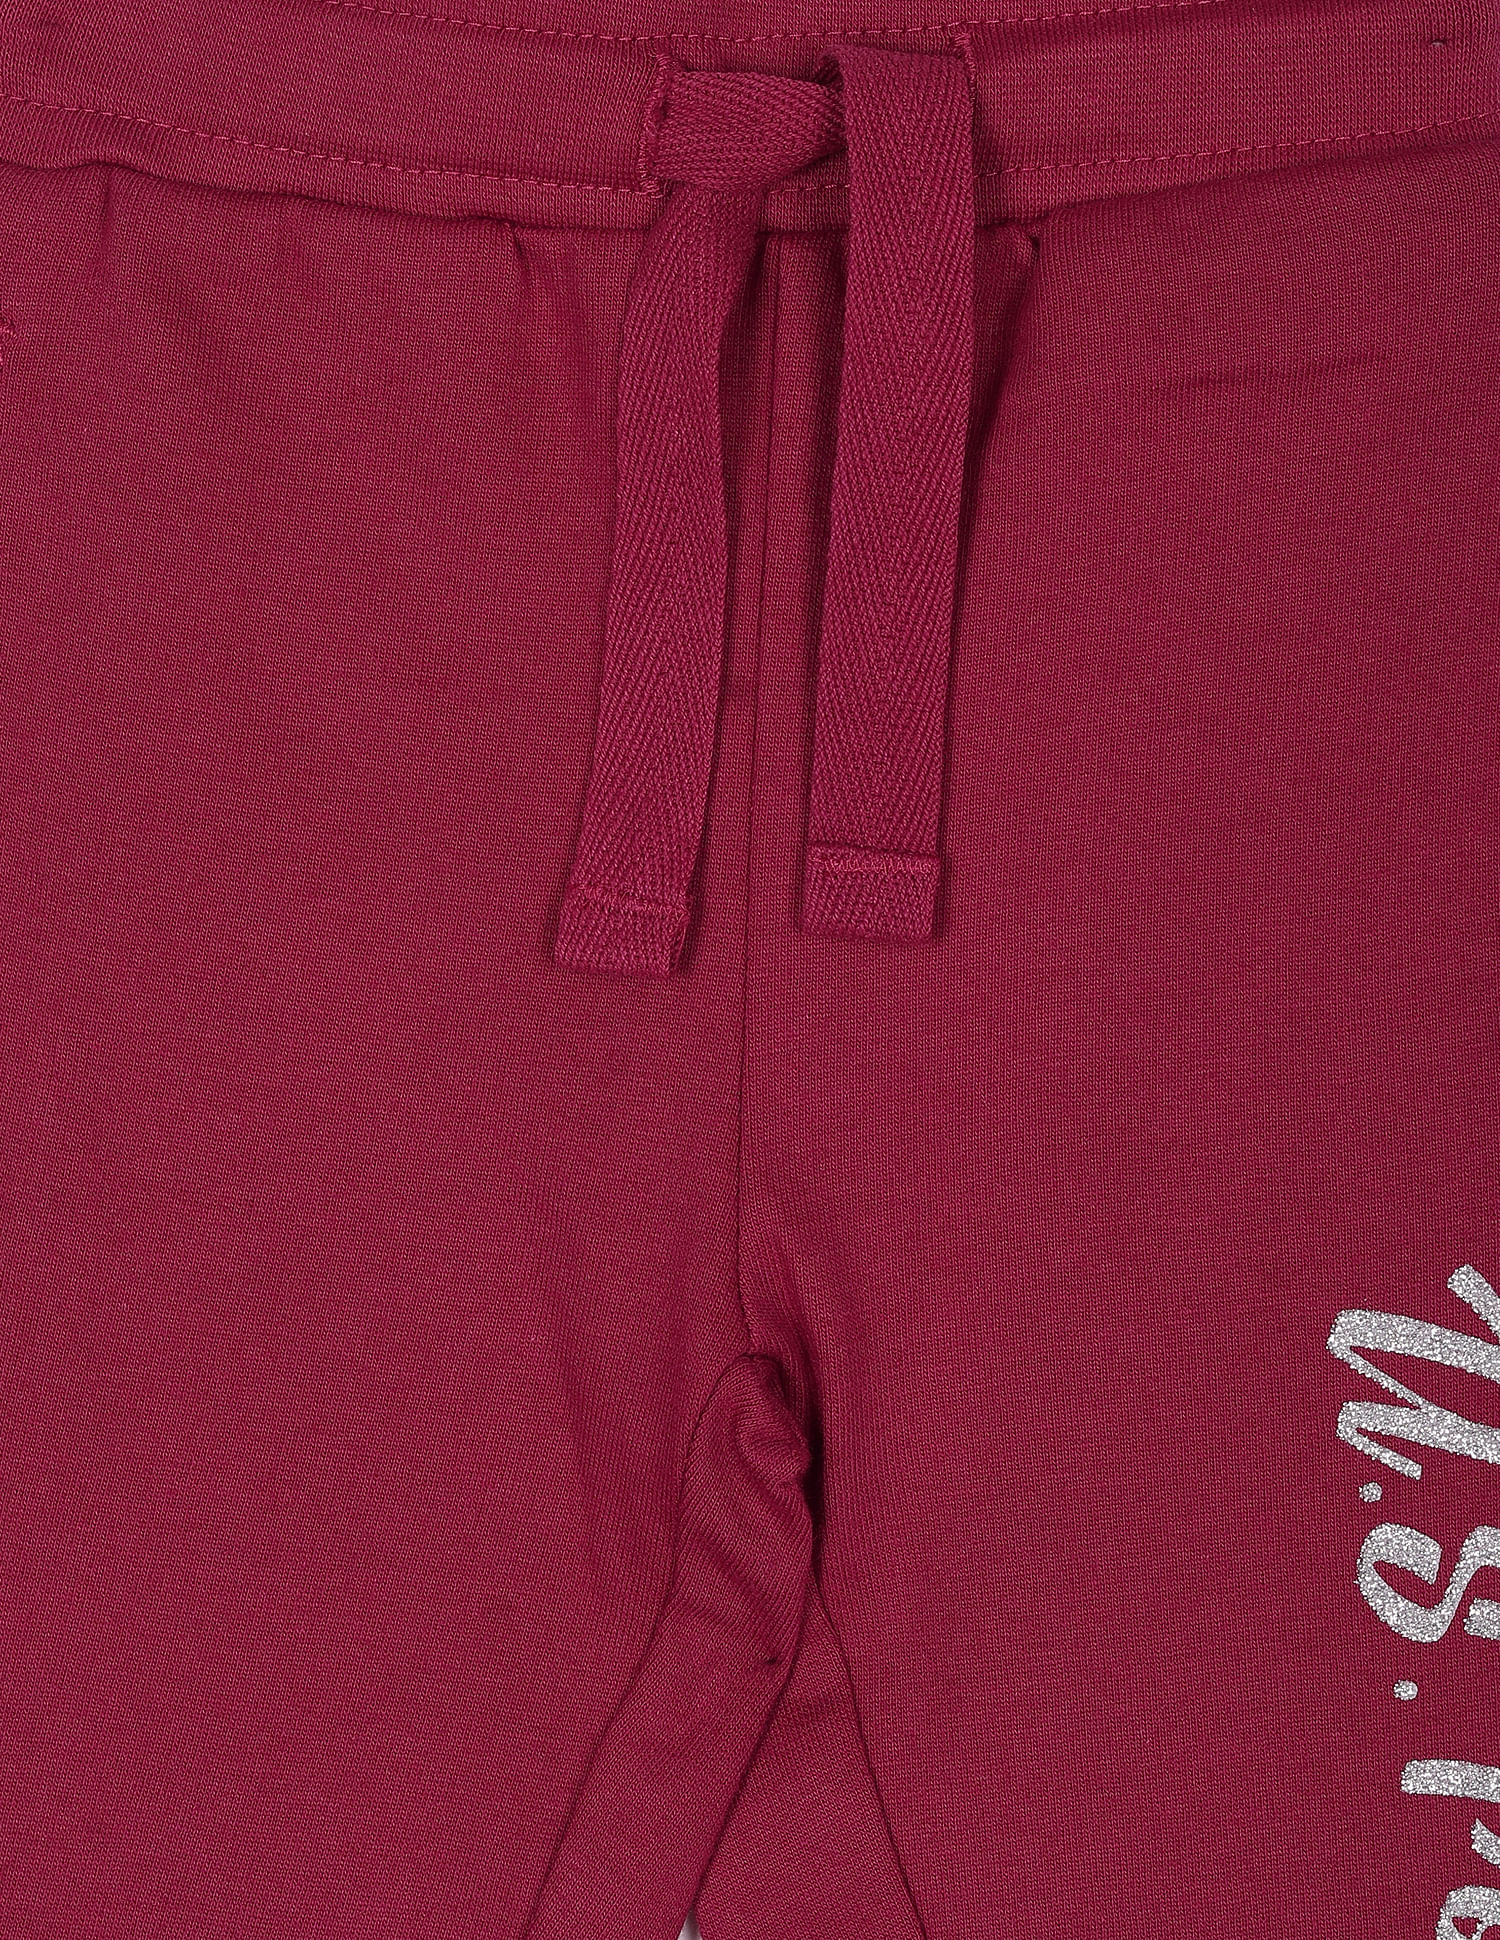 U.S. POLO ASSN. Girl's Regular Track Pants (UGTRK0046_Red_12T) : Amazon.in:  Clothing & Accessories